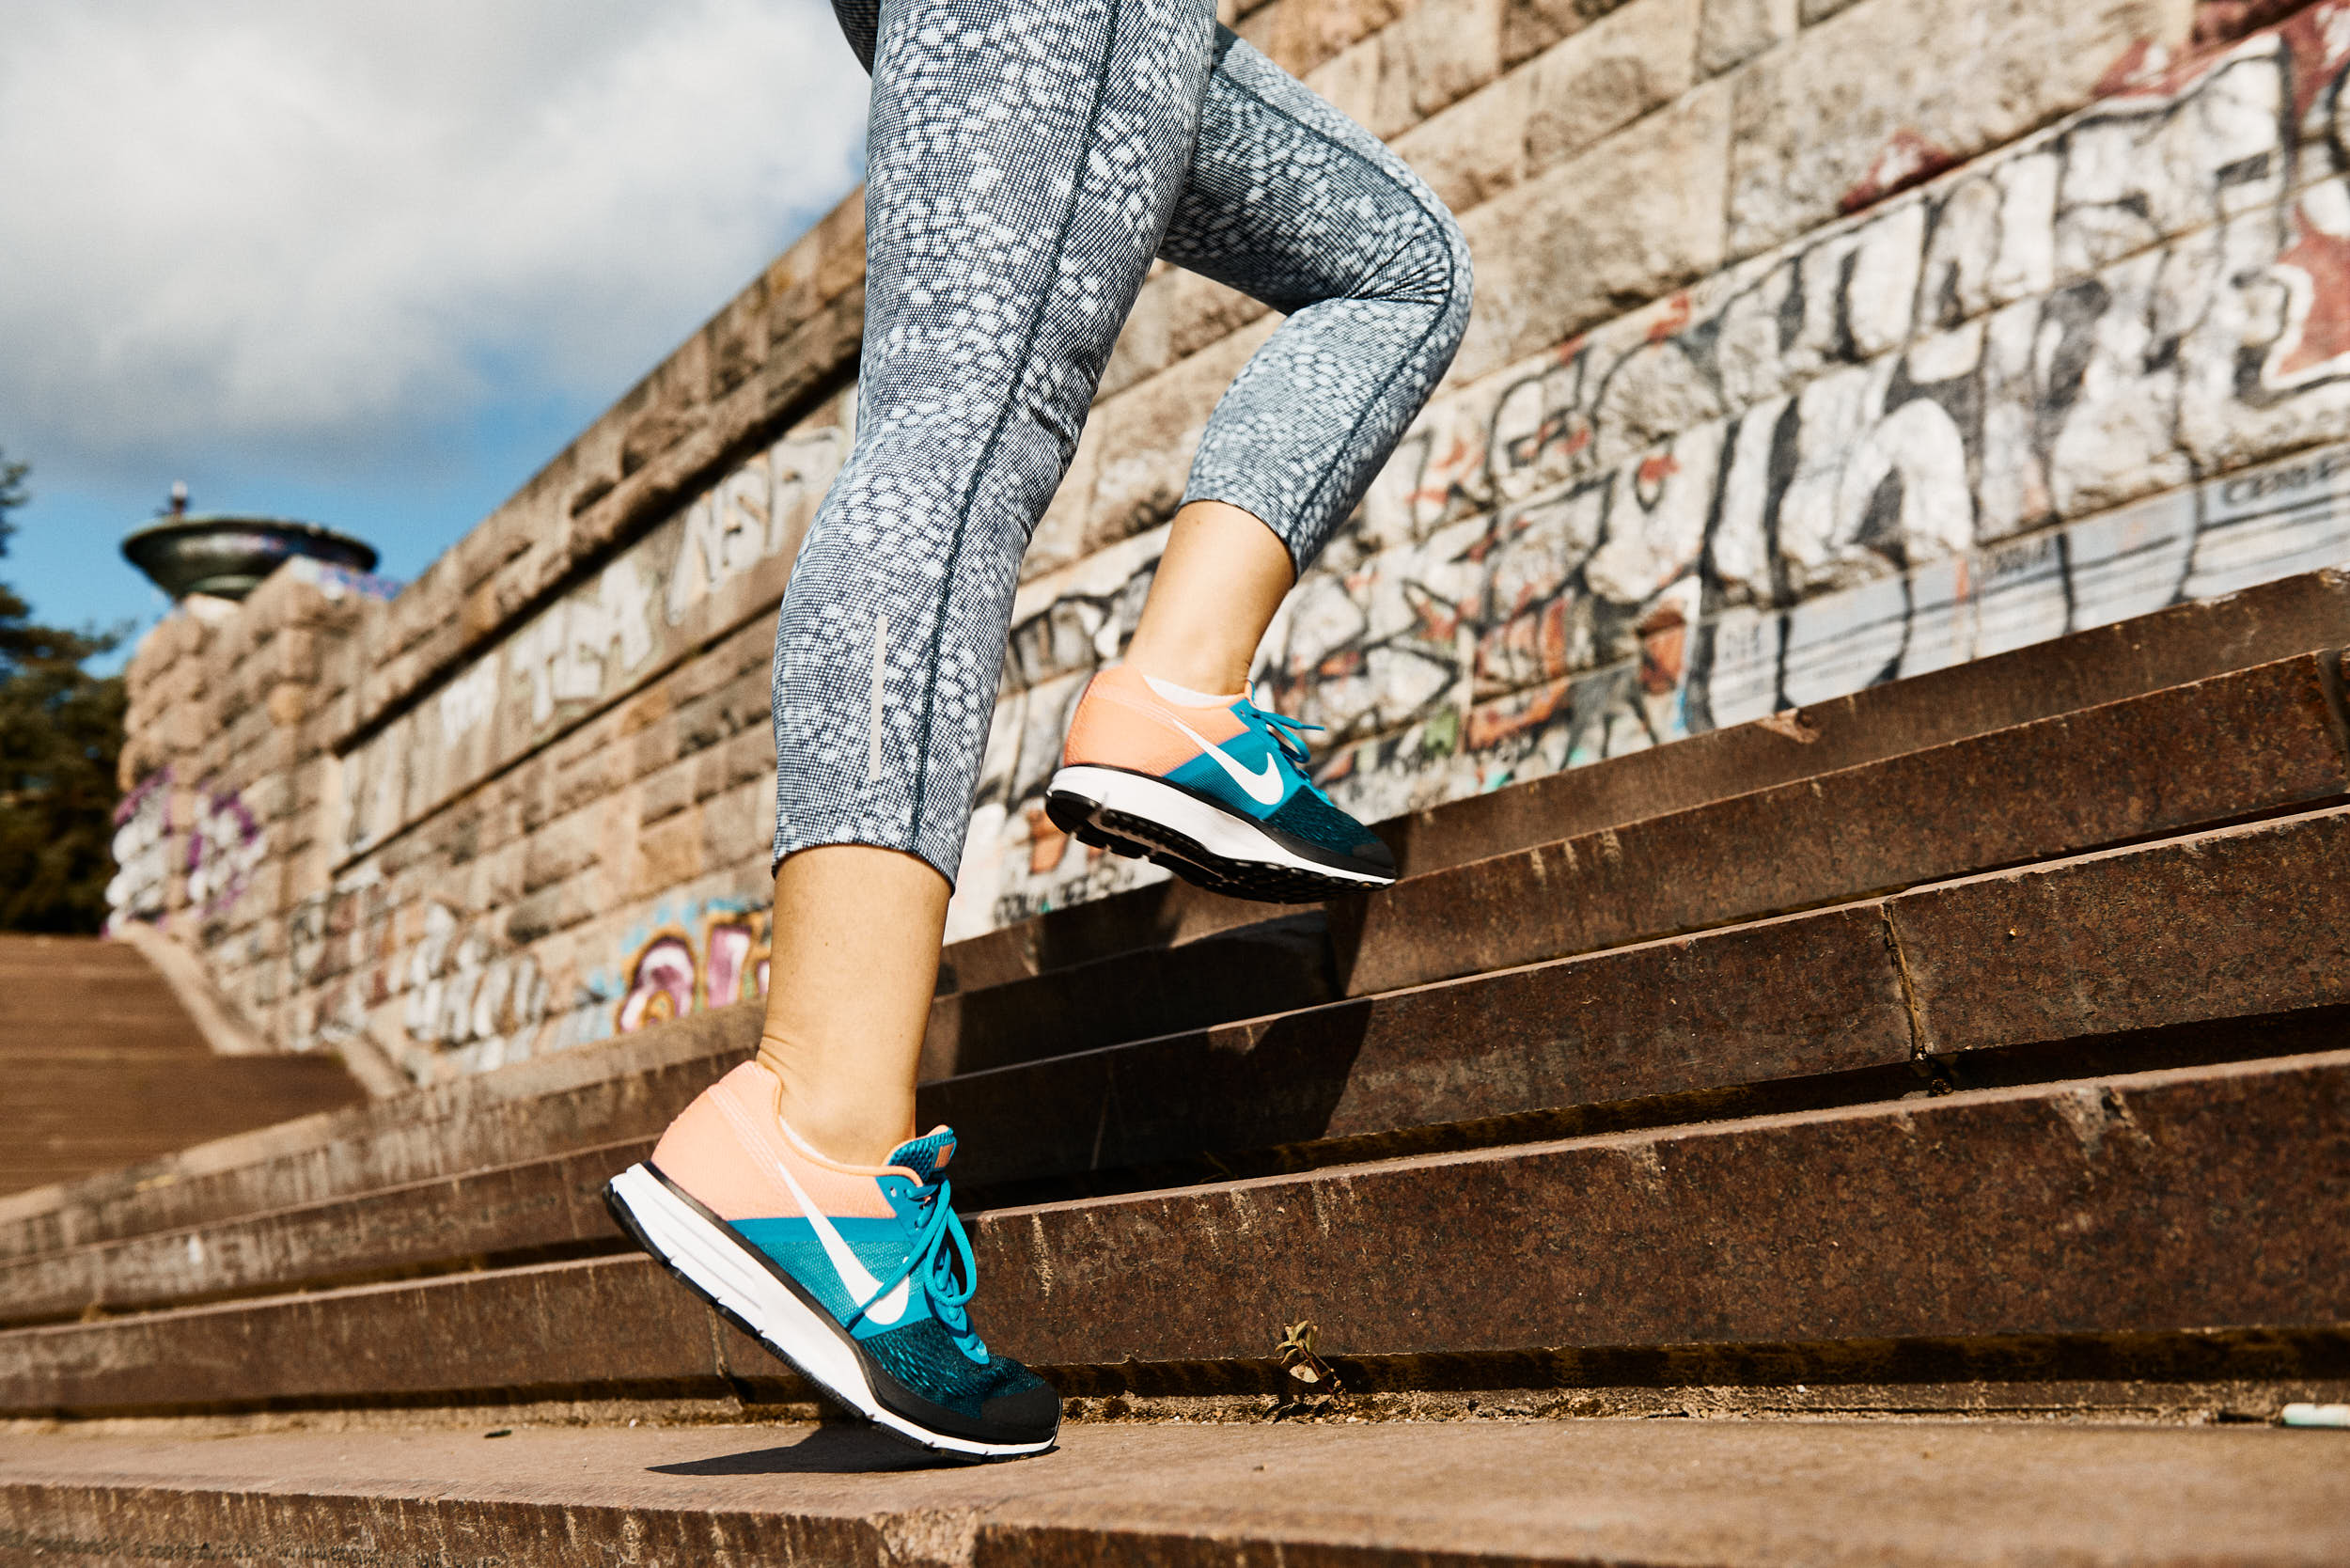 Running apparel advertising photography: detail of a girl in running shoes on stairs.